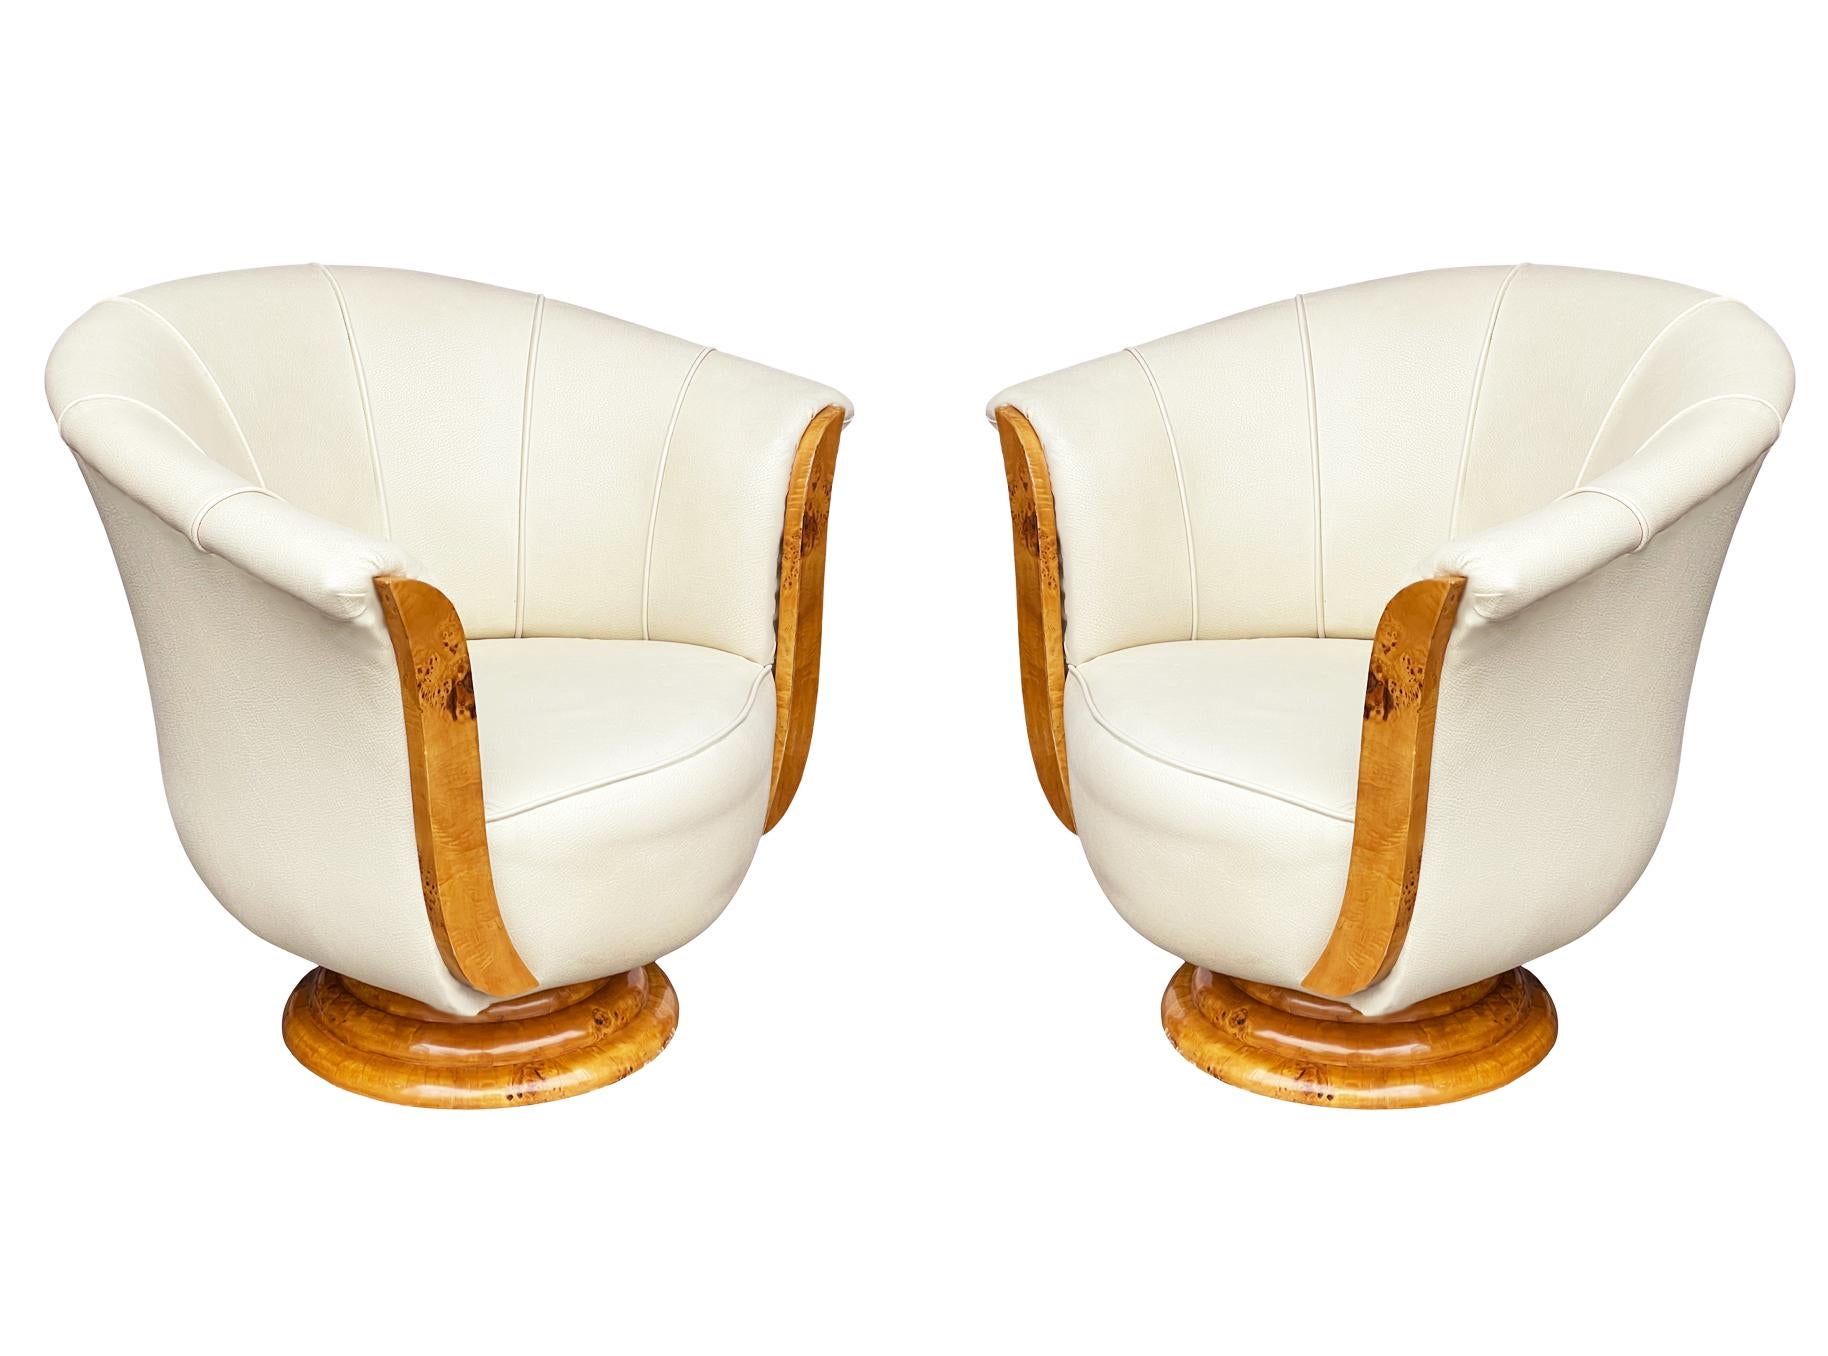 Midcentury Cream Leather & Burl Club Chairs or Lounge Chairs in Art Deco Form In Good Condition For Sale In Philadelphia, PA